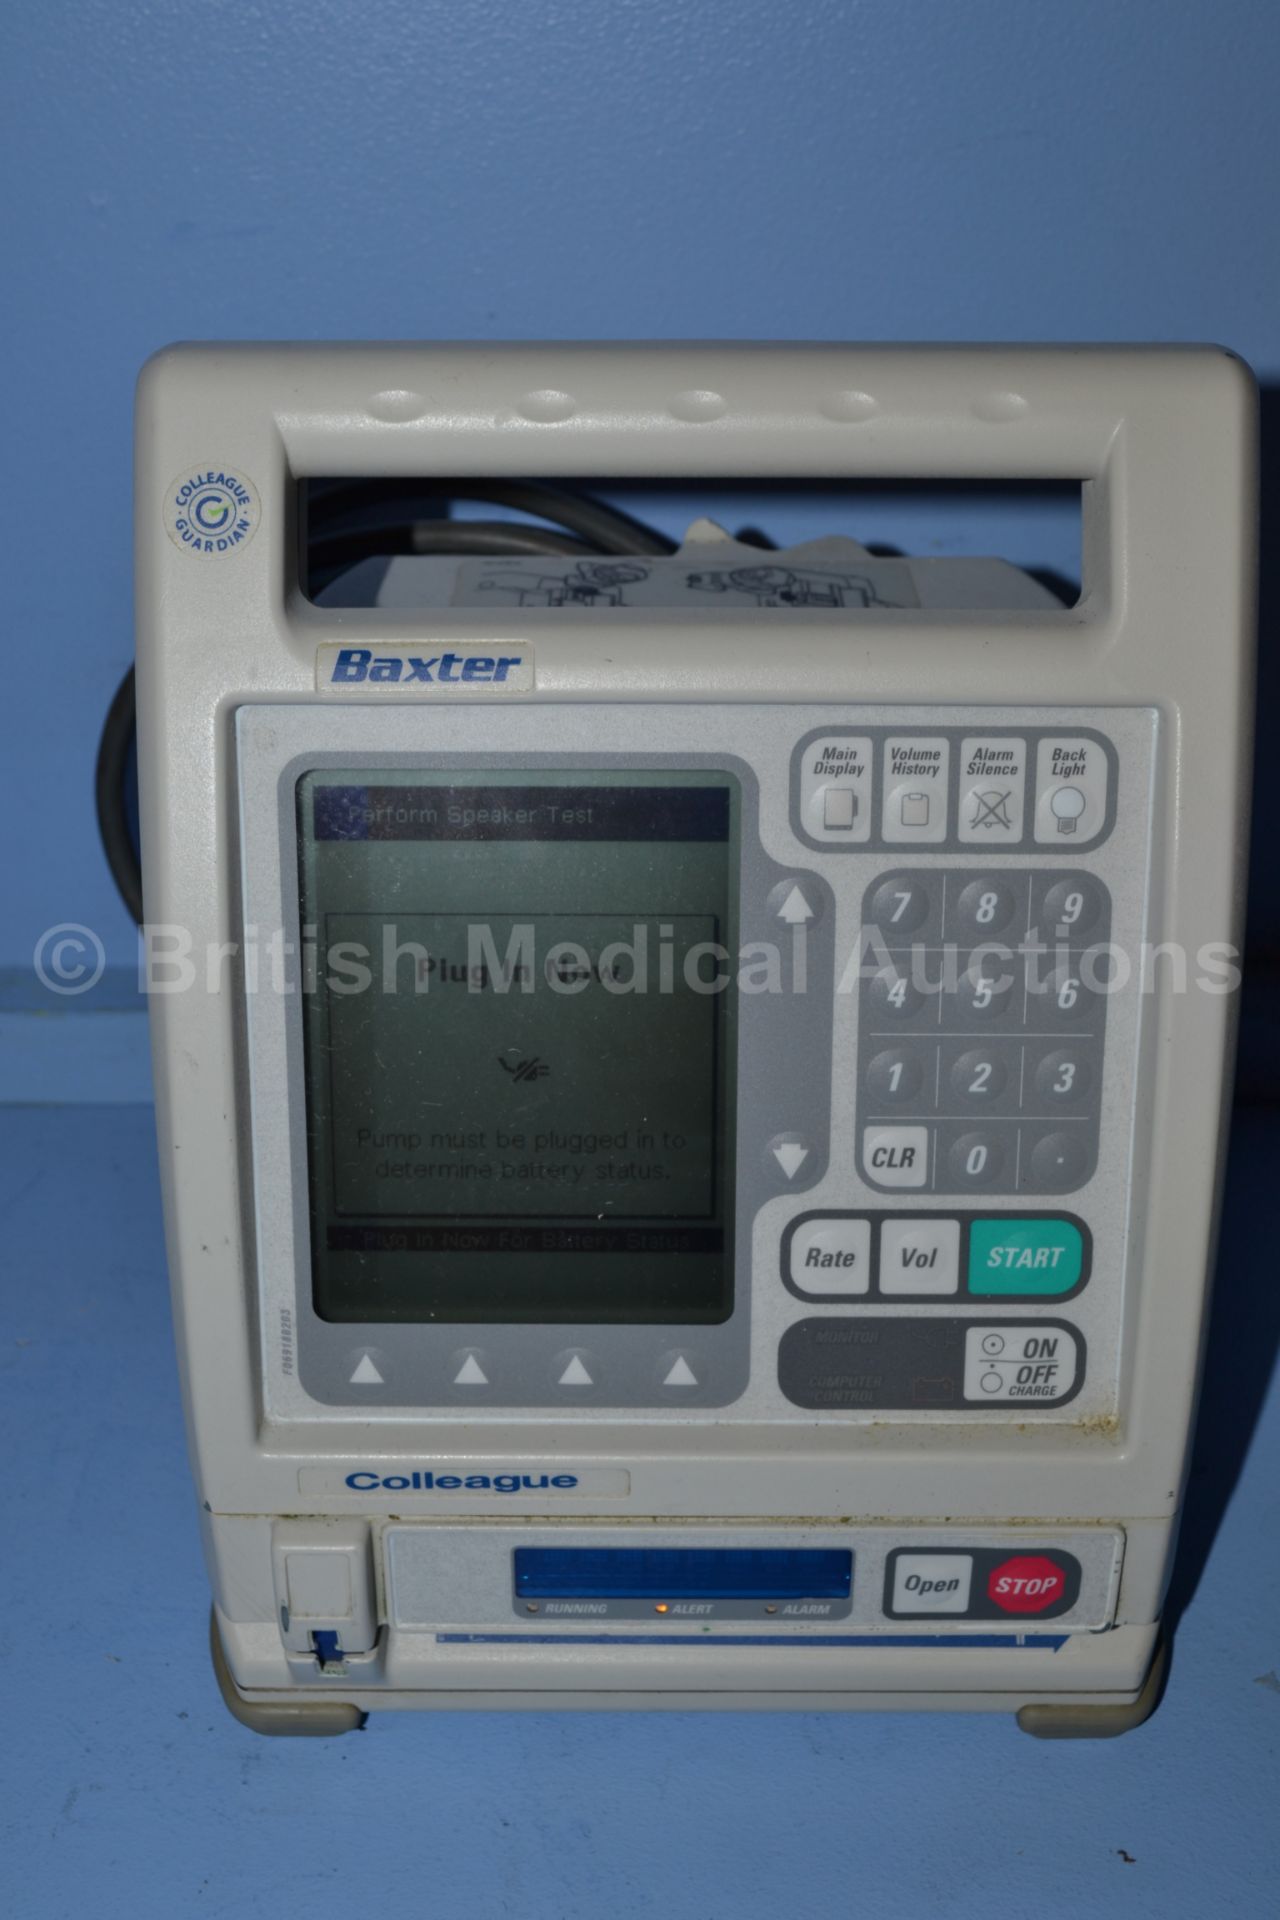 6 x Baxter Colleague Infusion Pumps - Image 3 of 4